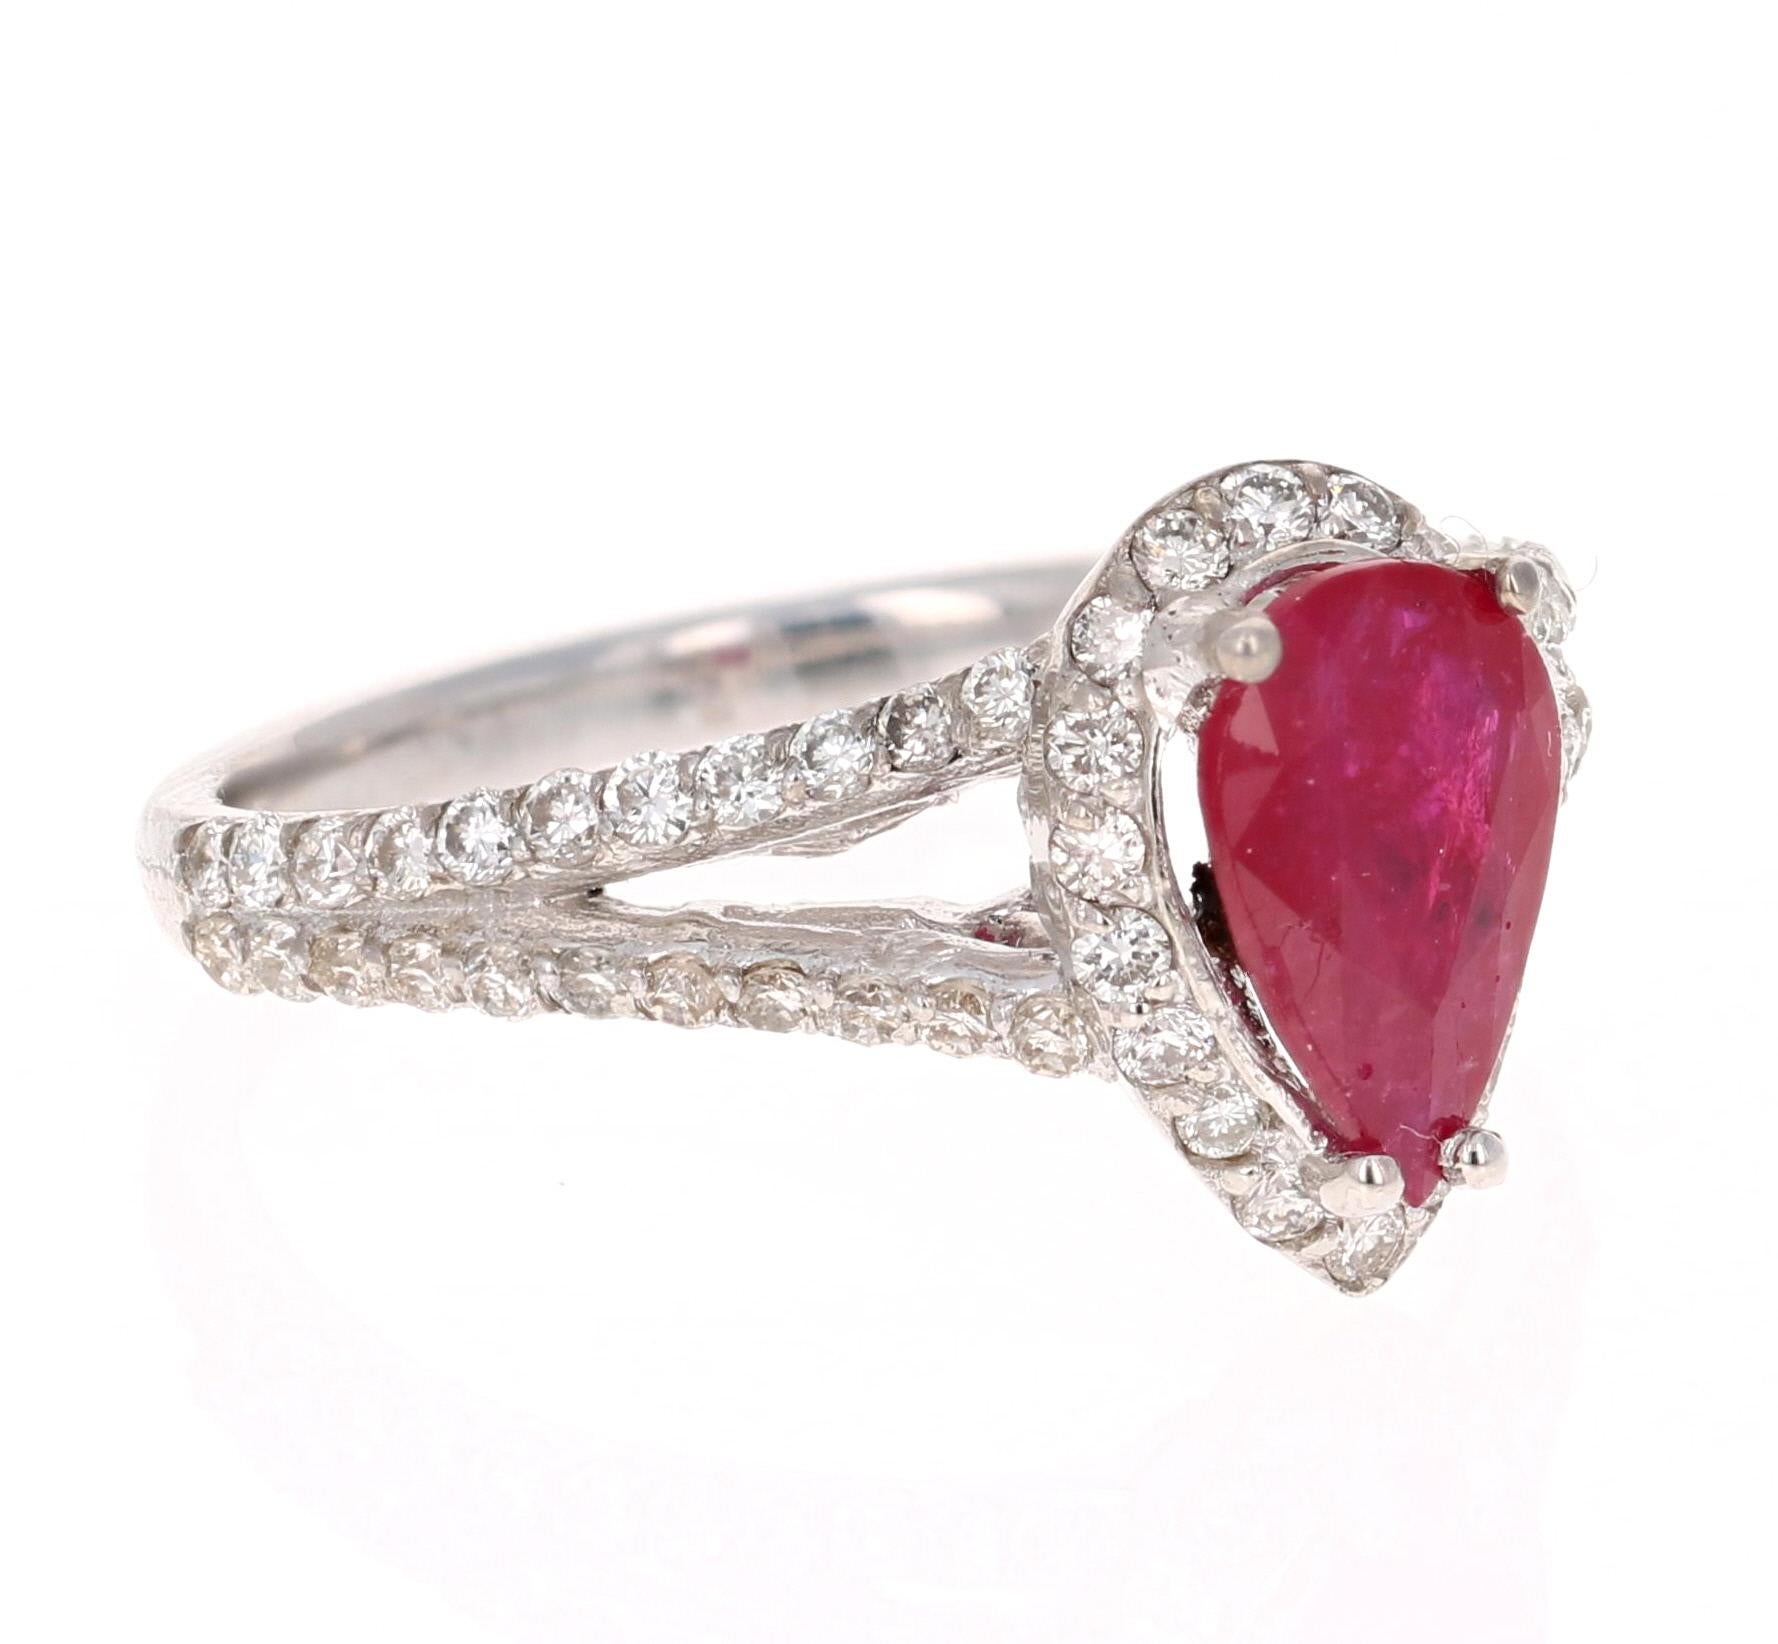 A simple yet beautiful ring with a 1.18 Carat Pear Cut Ruby as its center and 62 Round Cut Diamonds that weigh 0.60 carats. The total carat weight of the ring is 1.78 carats.

The ring is casted in 18K White Gold and weighs approximately 3.8 grams.